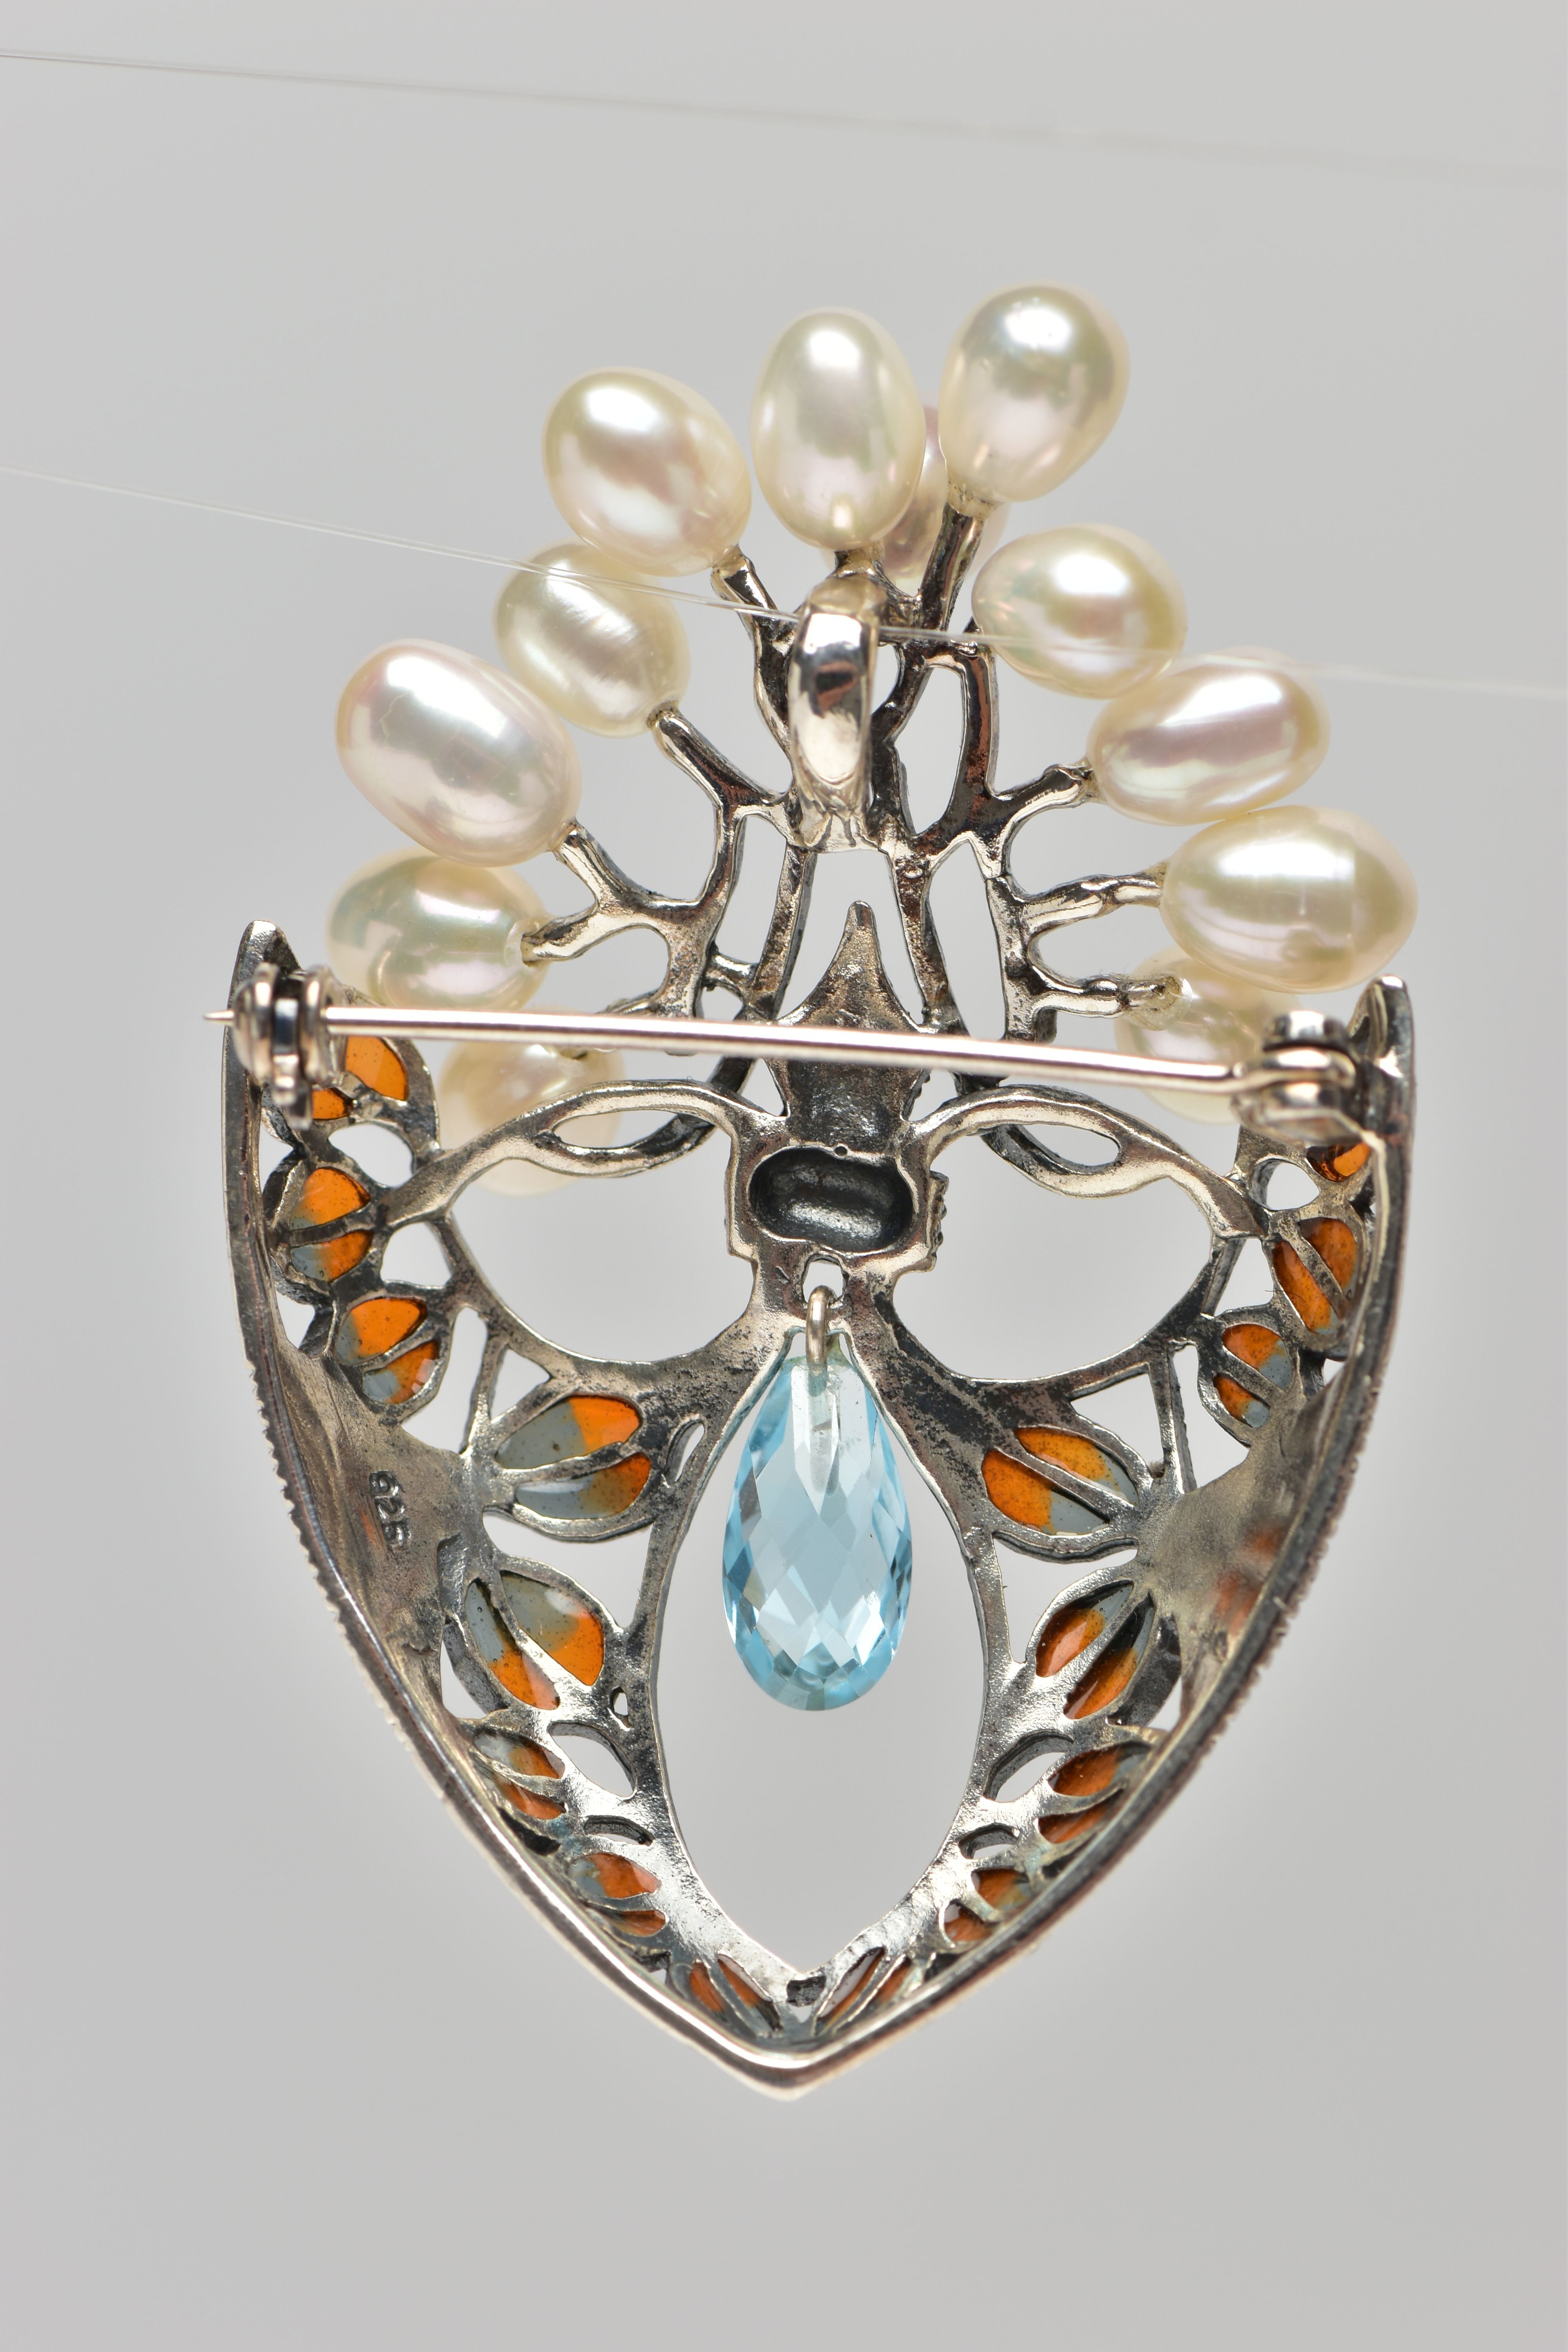 A PLIQUE A JOUR BROOCH, of a shield shape, set with marcasite and cultured pearls, suspending a - Image 3 of 3